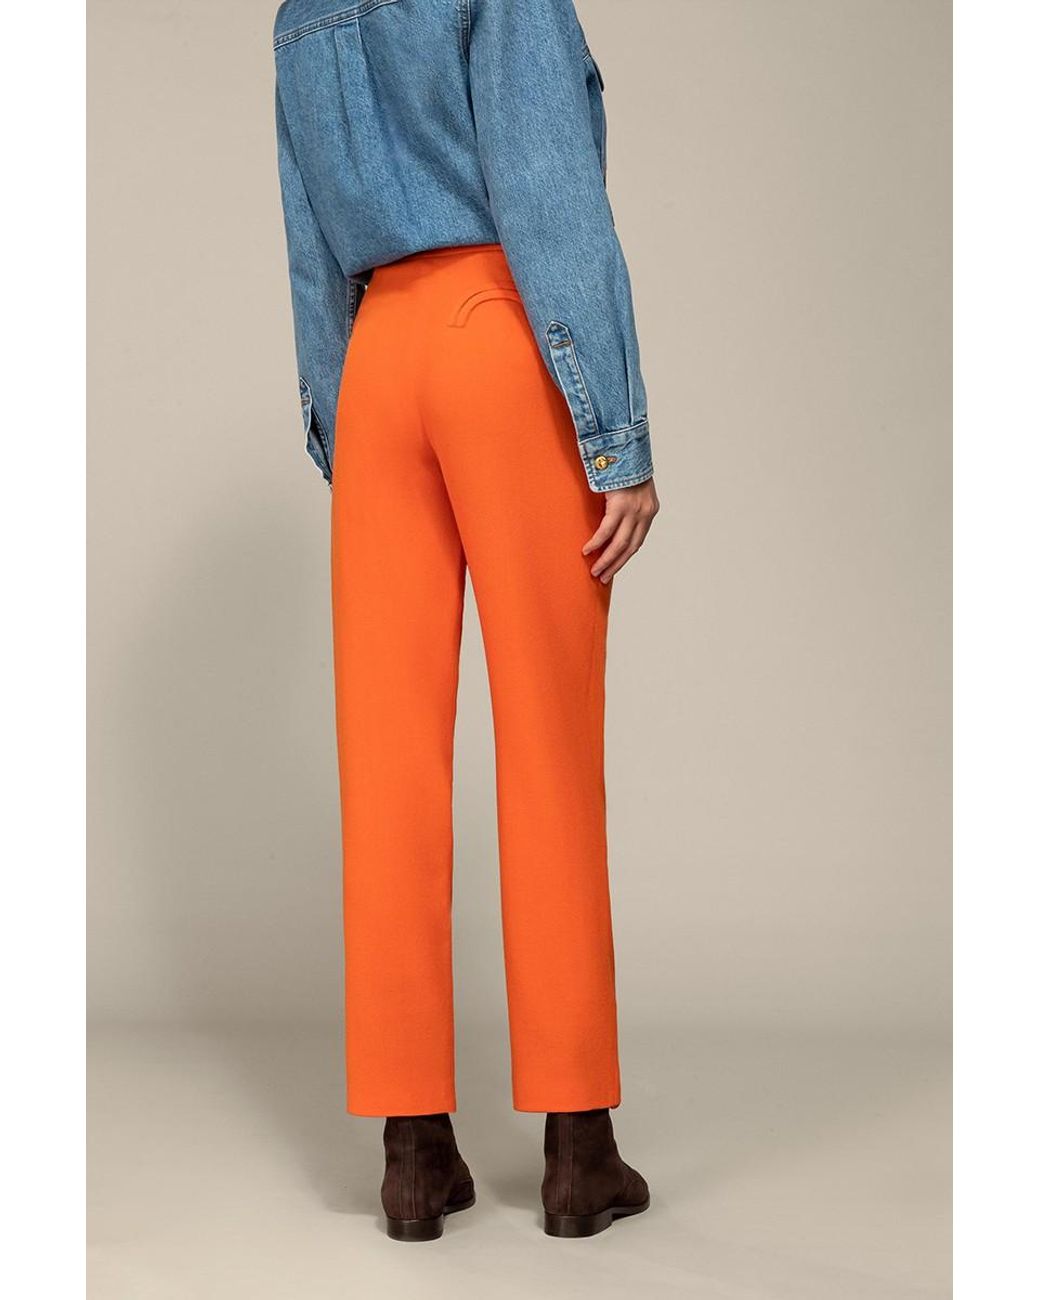 Slacks and Chinos Blazé Milano Trousers Womens Trousers Slacks and Chinos Blazé Milano Wool Blaze Milano High-rise Cropped Pants in Orange 